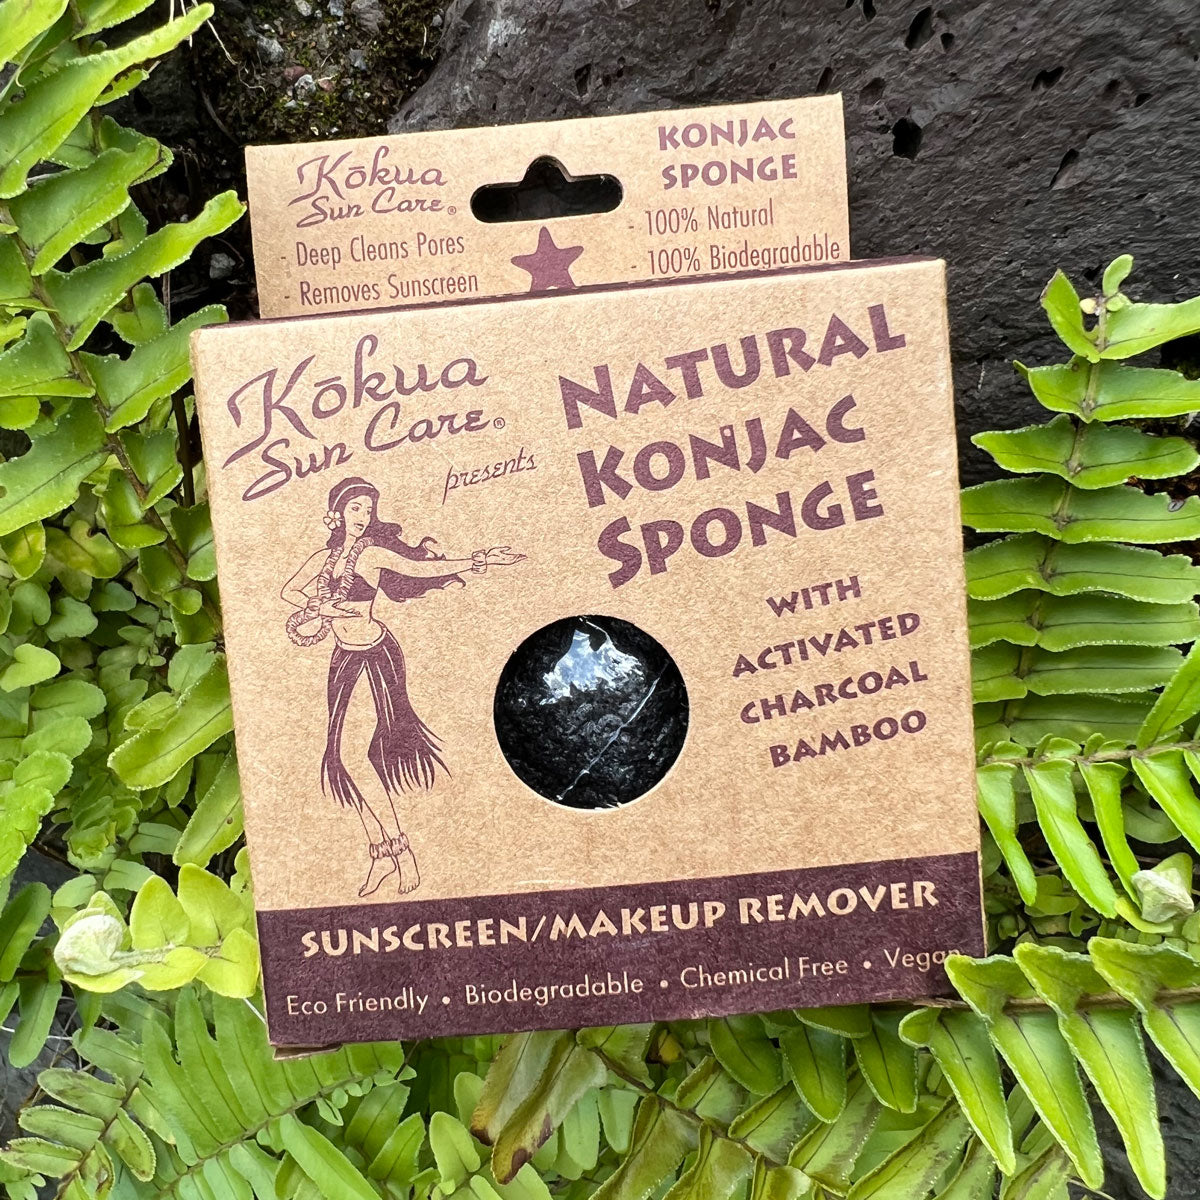 Konjac Sponge/Sunscreen Remover with Activated Bamboo Charcoal - Starfish-shaped